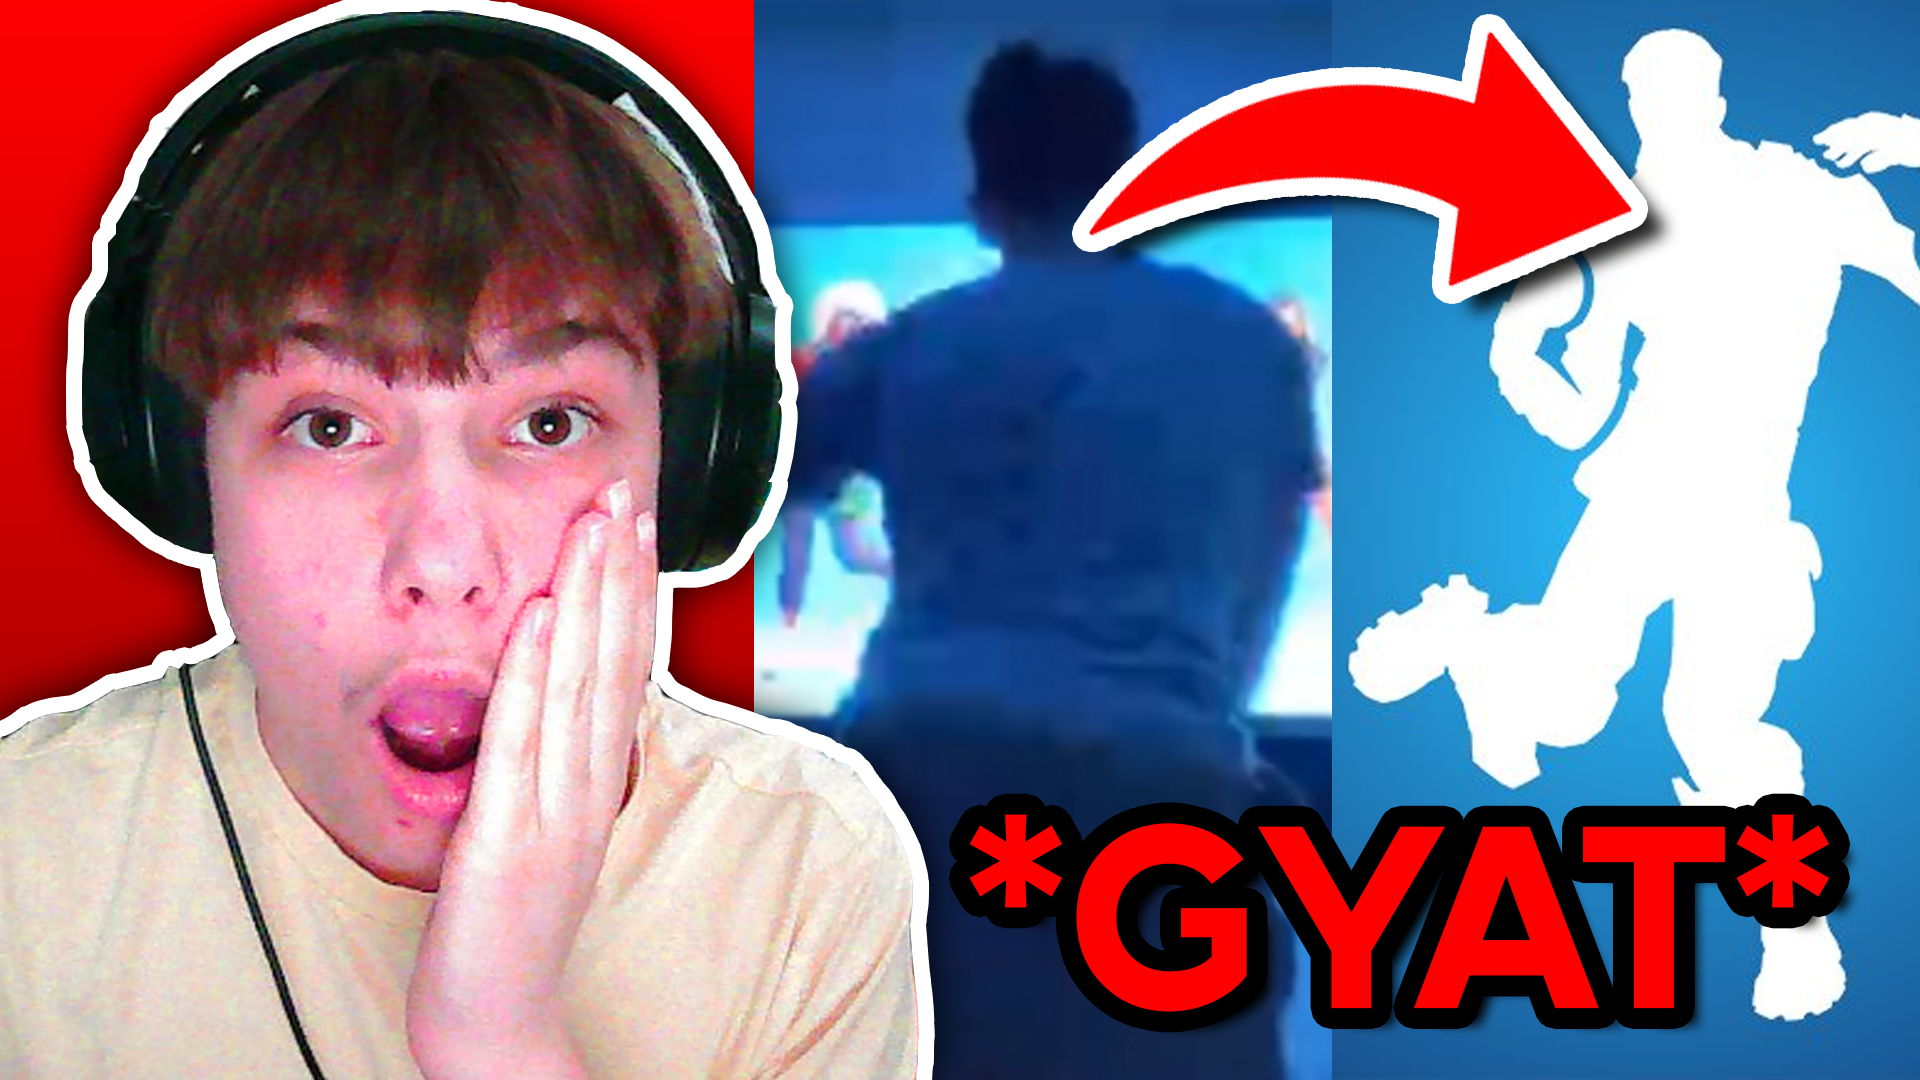 He Showed His GYAT On Camera... *MUST WATCH*